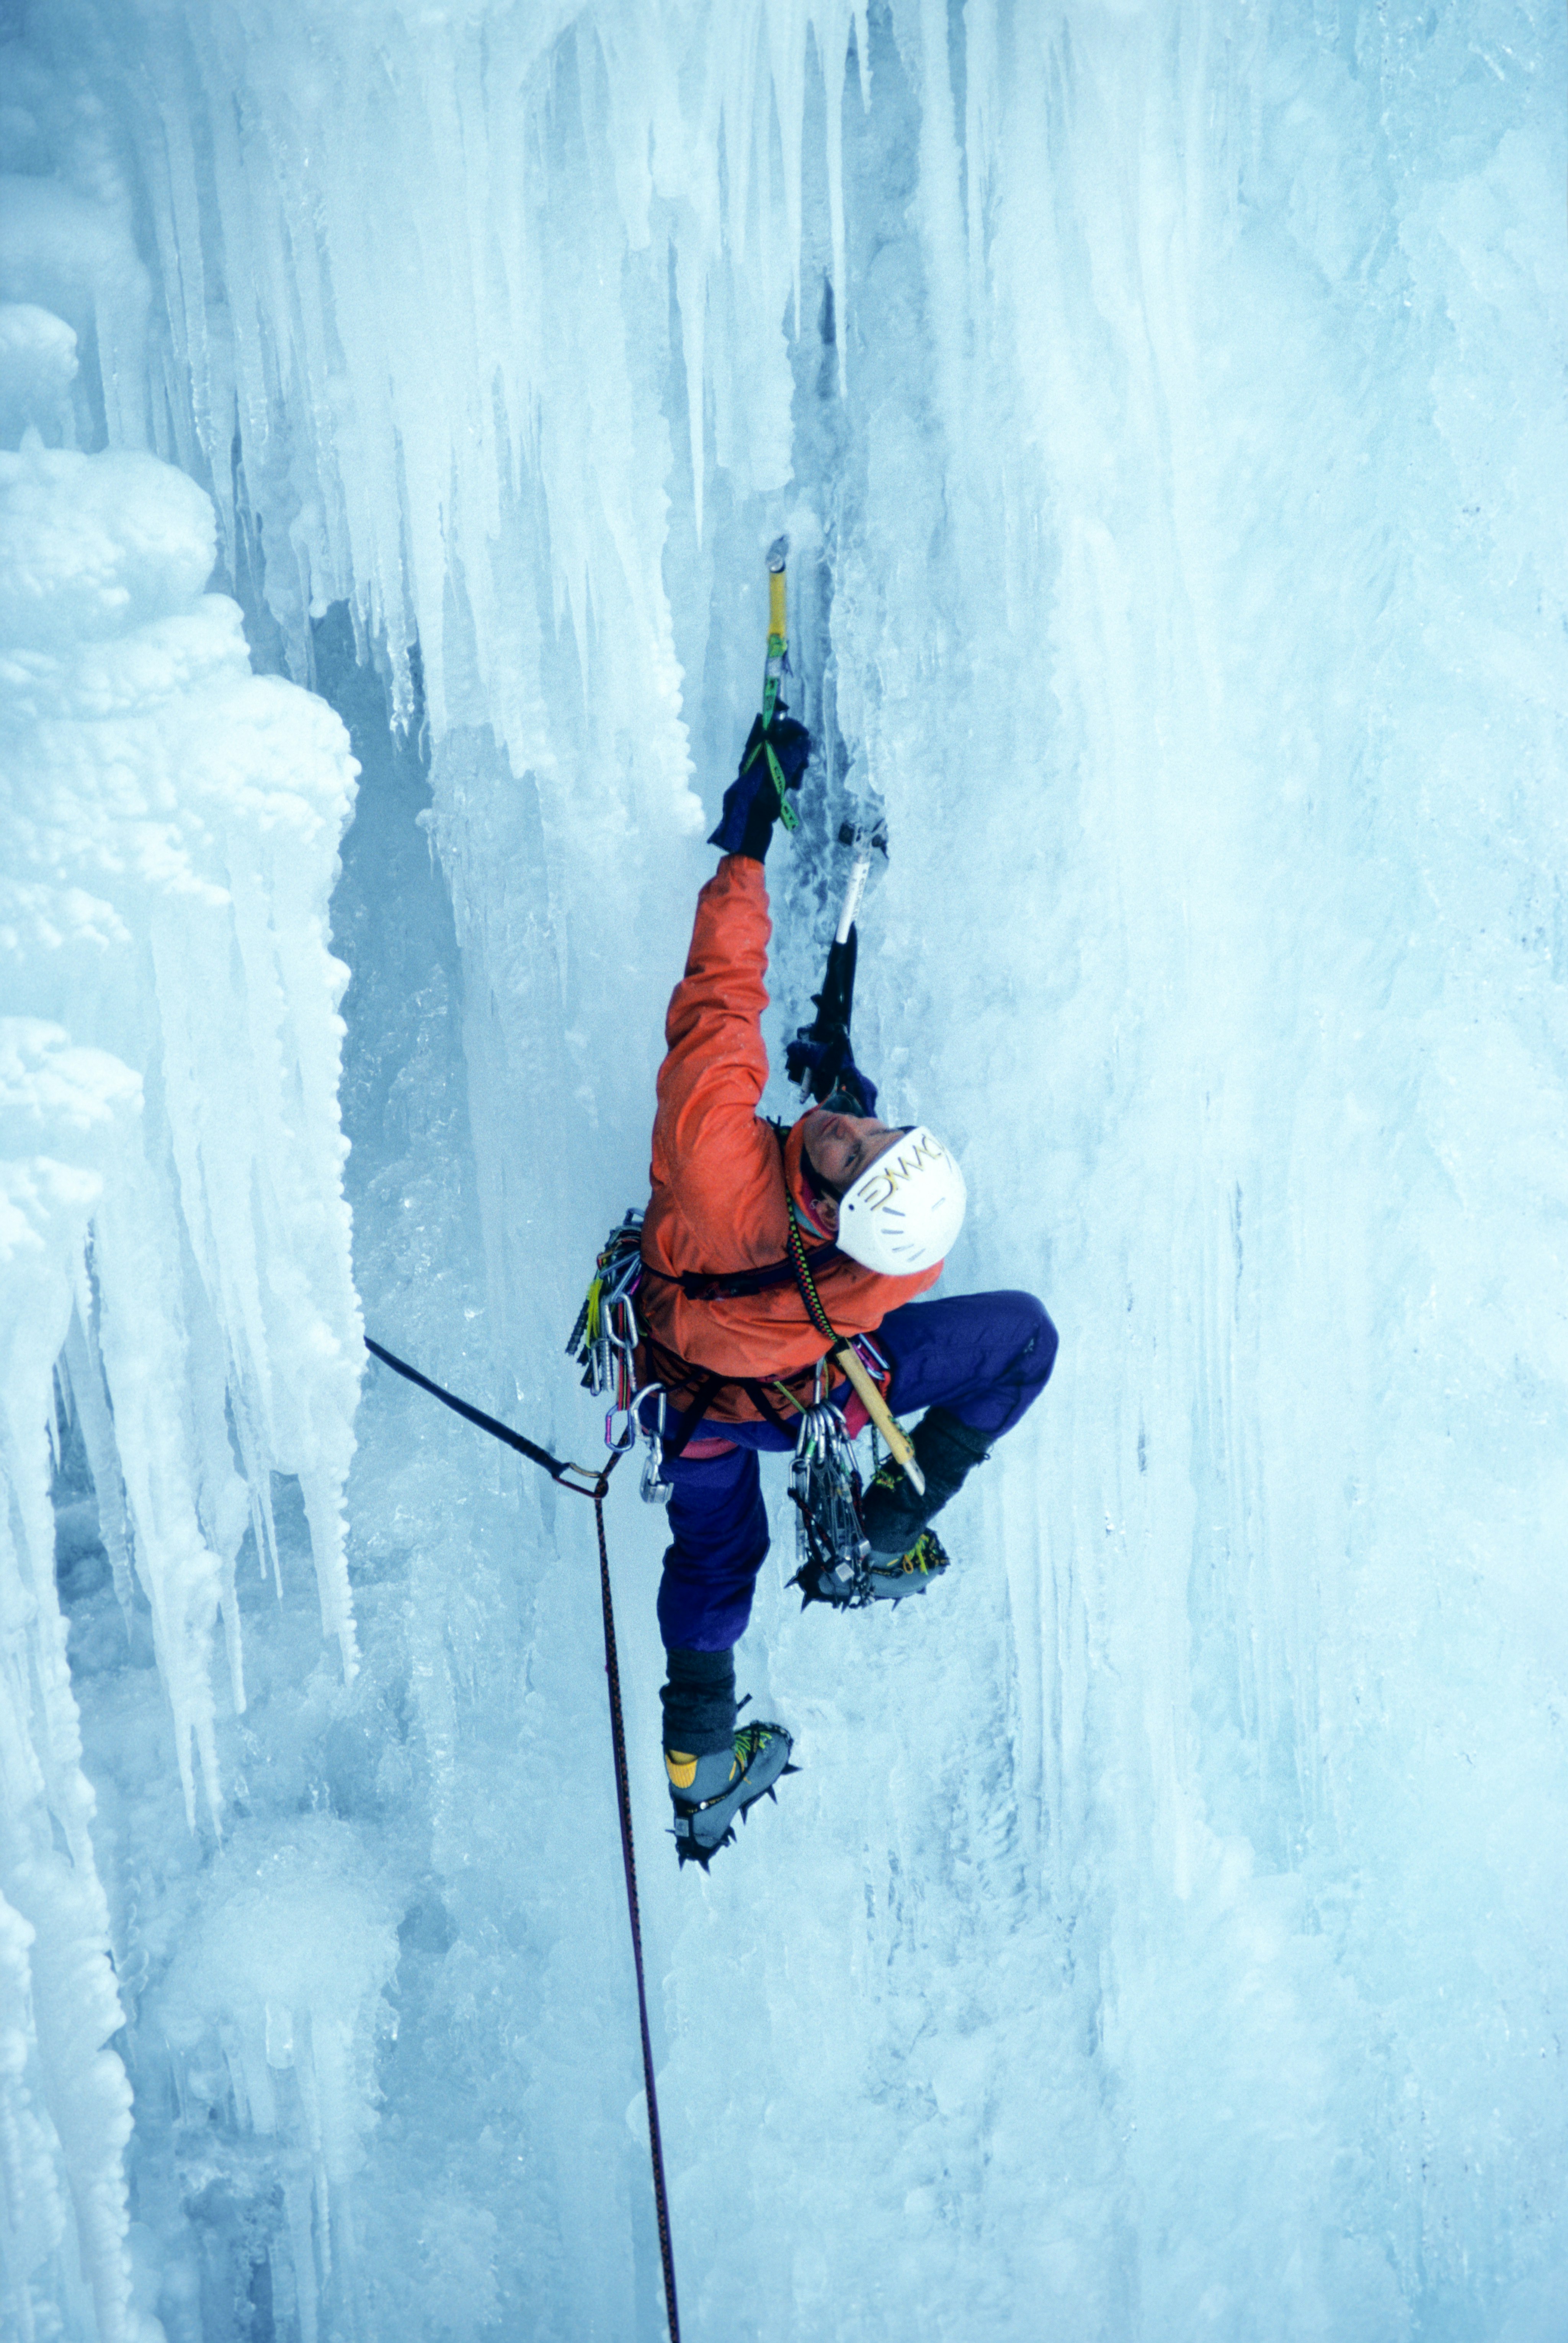 Climbing on the ice cliff